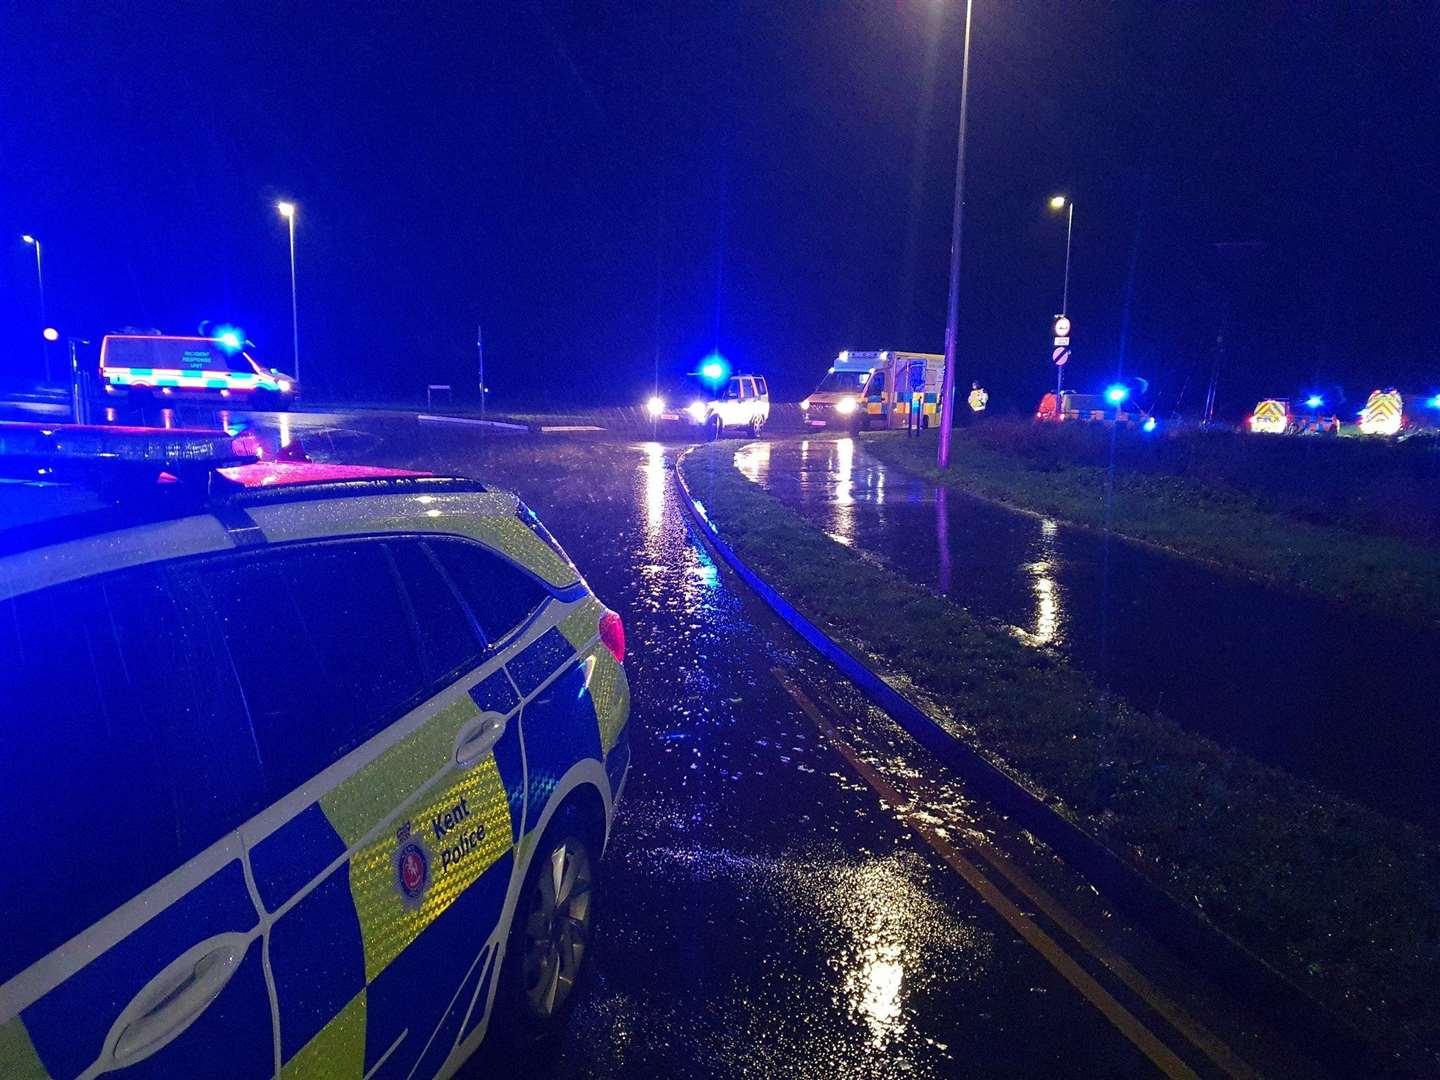 Police, fire service and paramedics were all called to the incident at the Stoke Road and Eschol Road roundabout near Kingsnorth power station. Picture: Kent Police Tactical Ops/Twitter